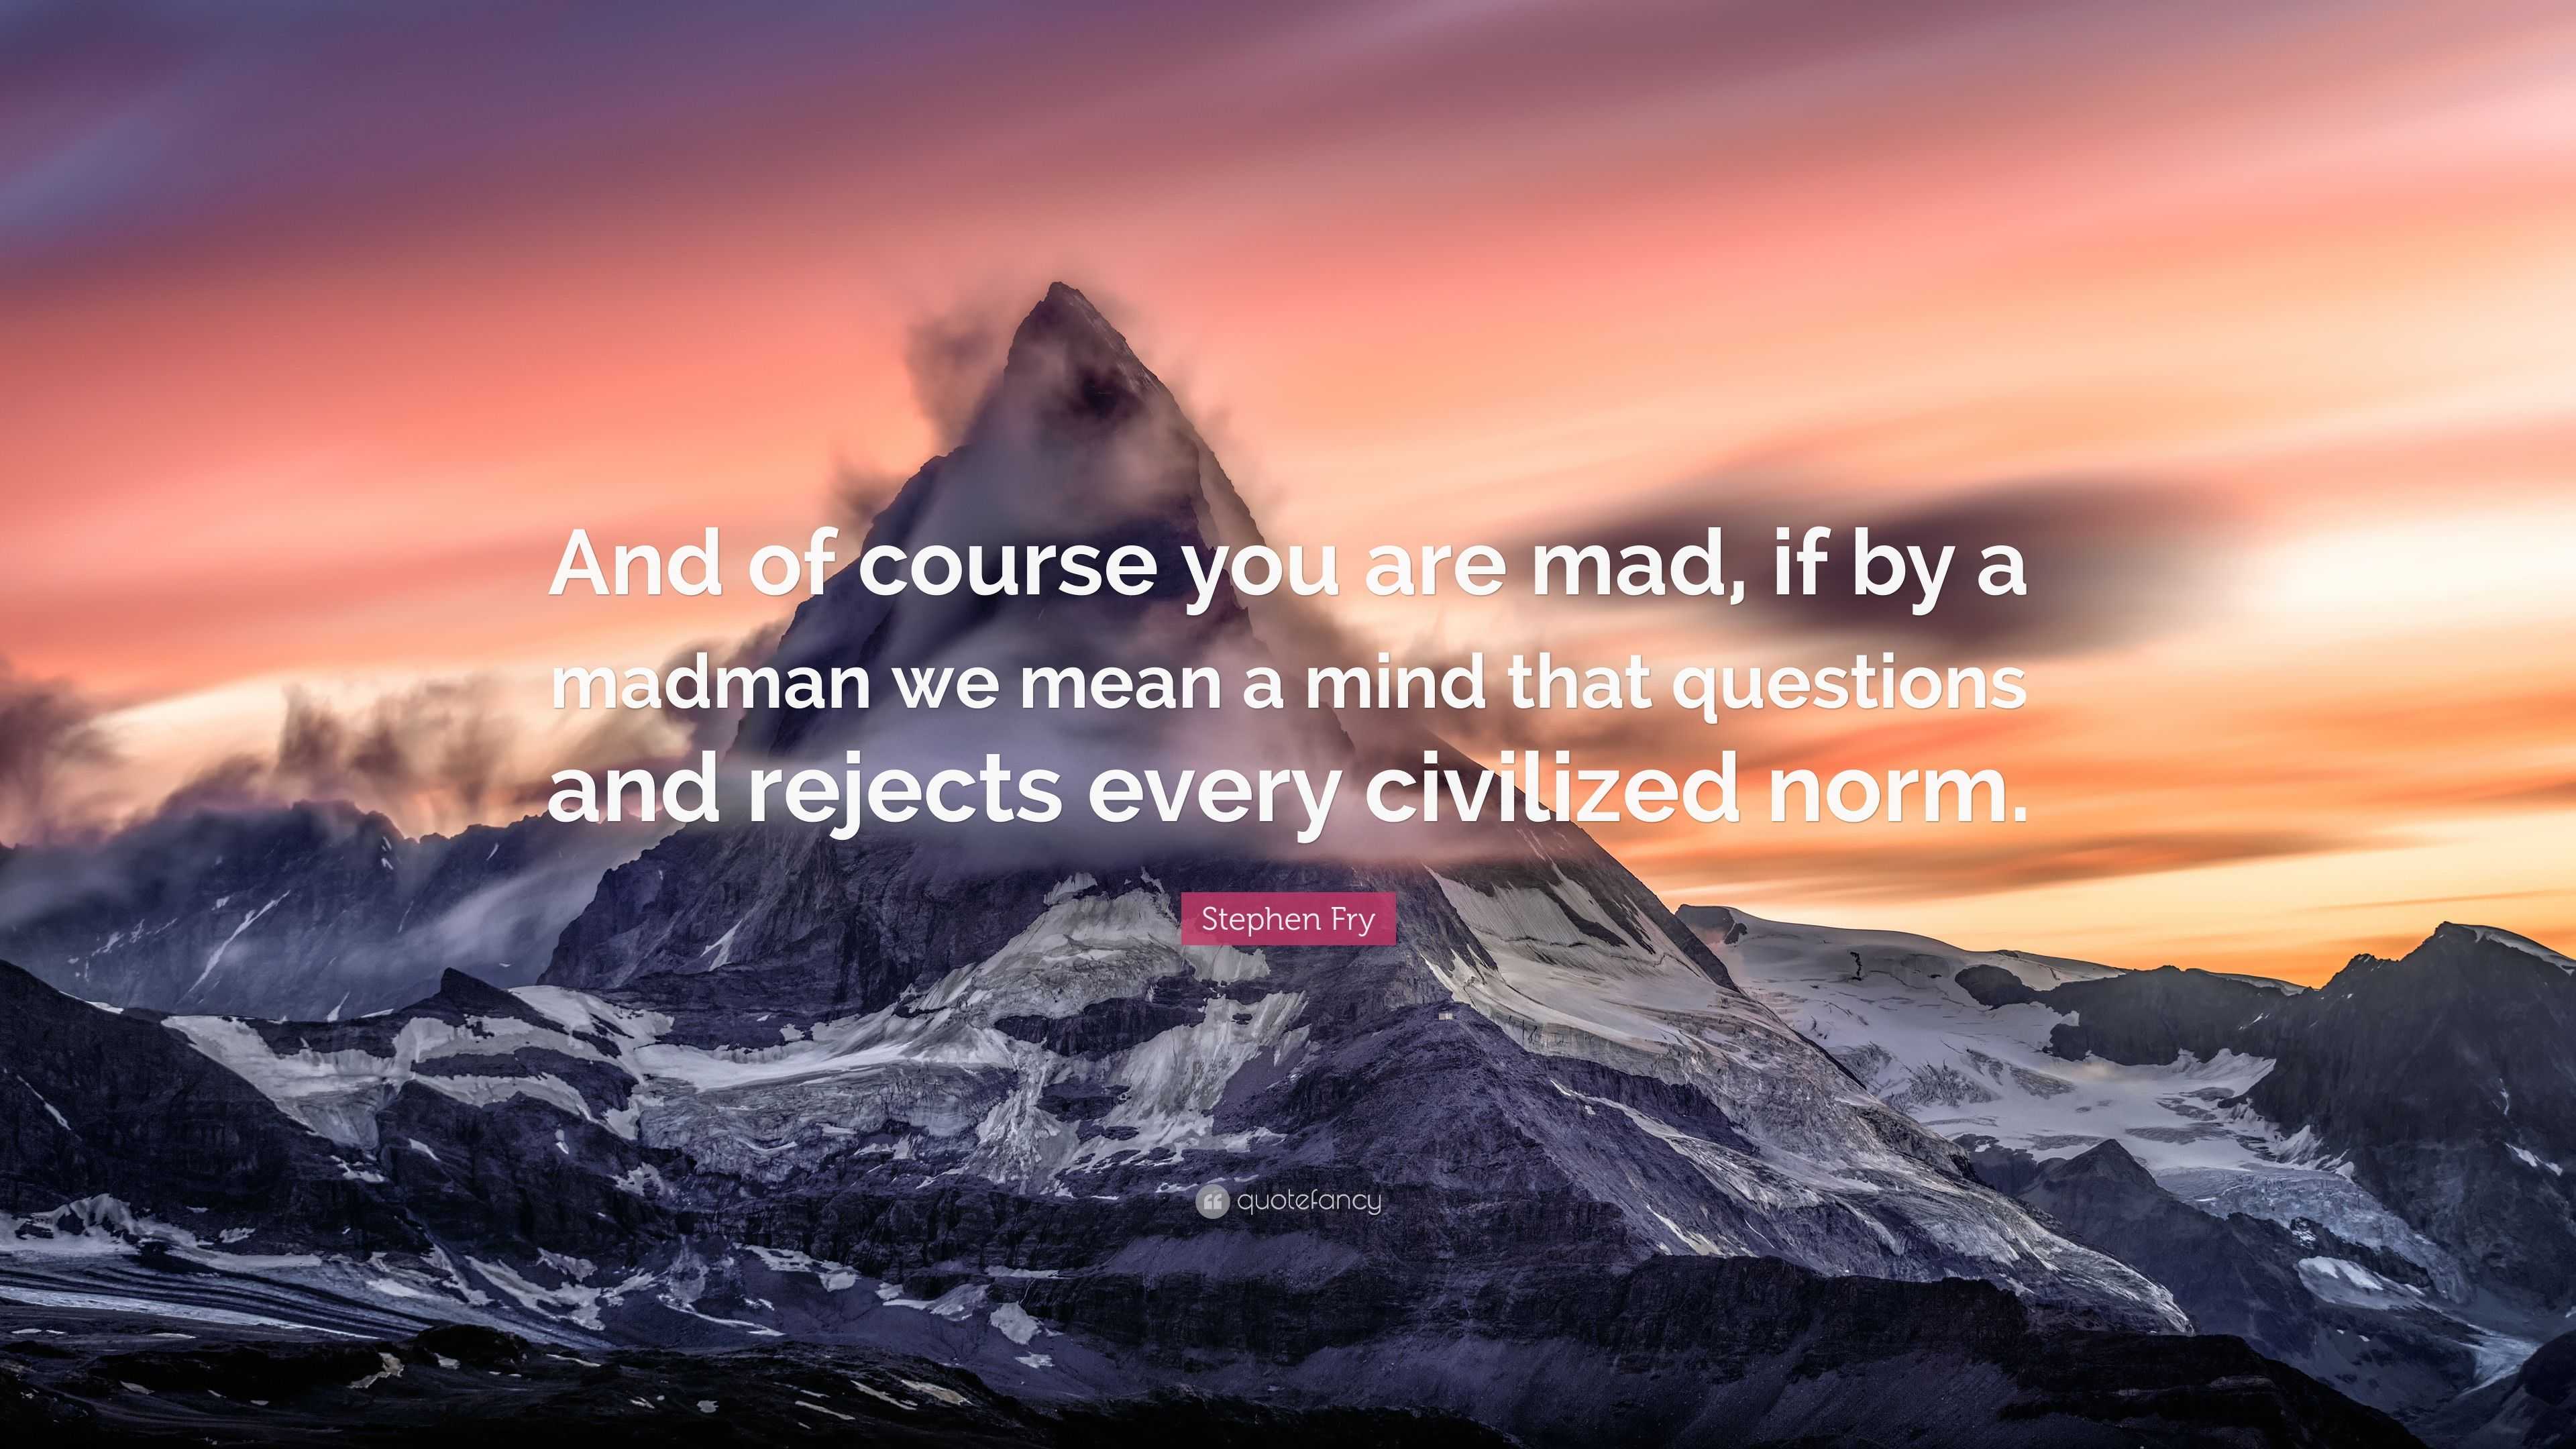 Stephen Fry Quote: “And of course you are mad, if by a madman we